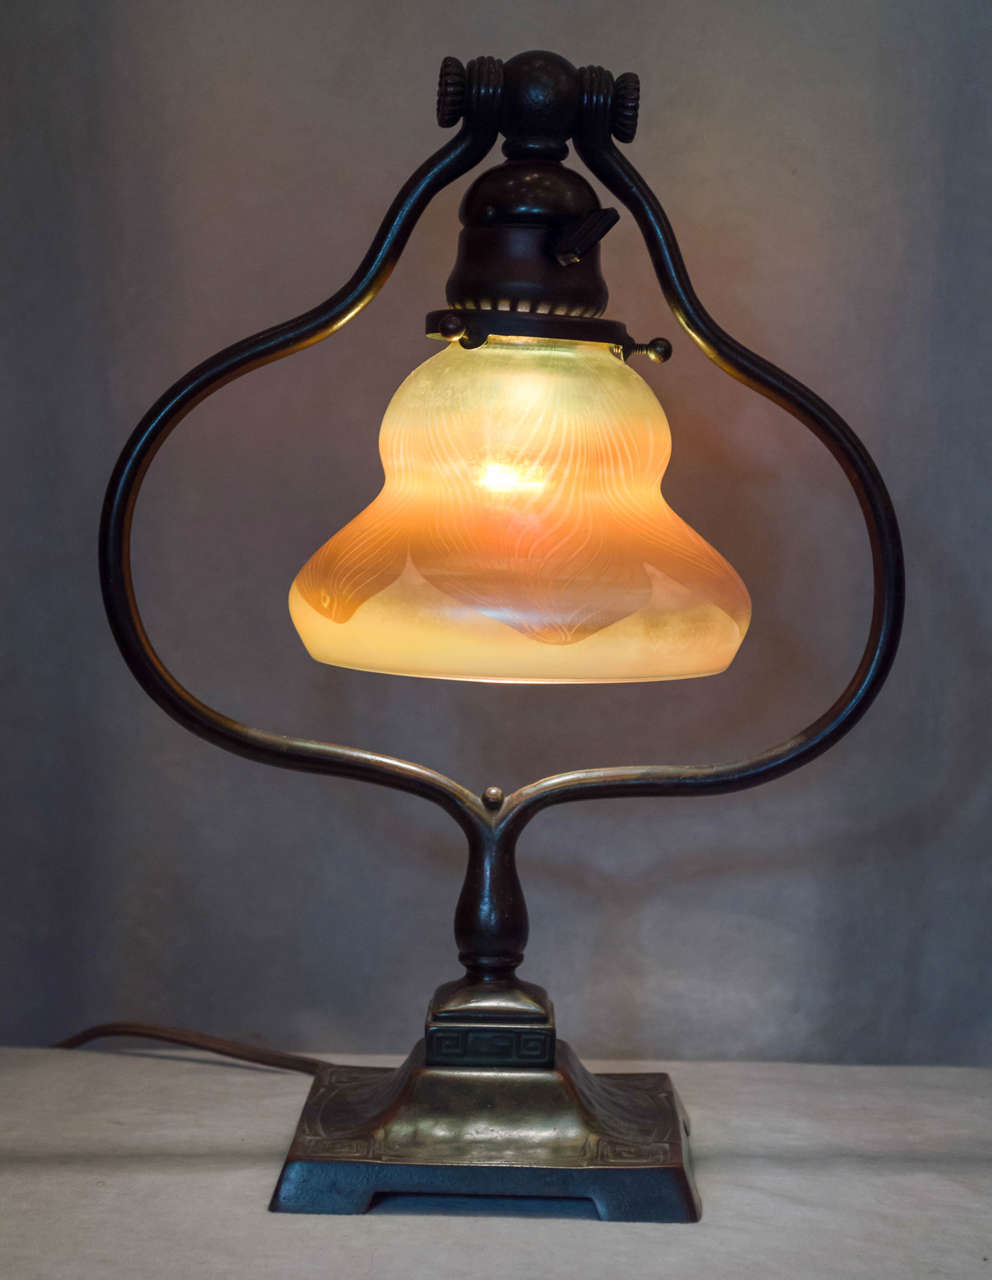 This very attractive Tiffany Studios lamp is a nice example of their harp style table lamp. The shade position can be adjusted with the shade moving up or down through the harp. The shade and base are both properly signed. The shade design is what